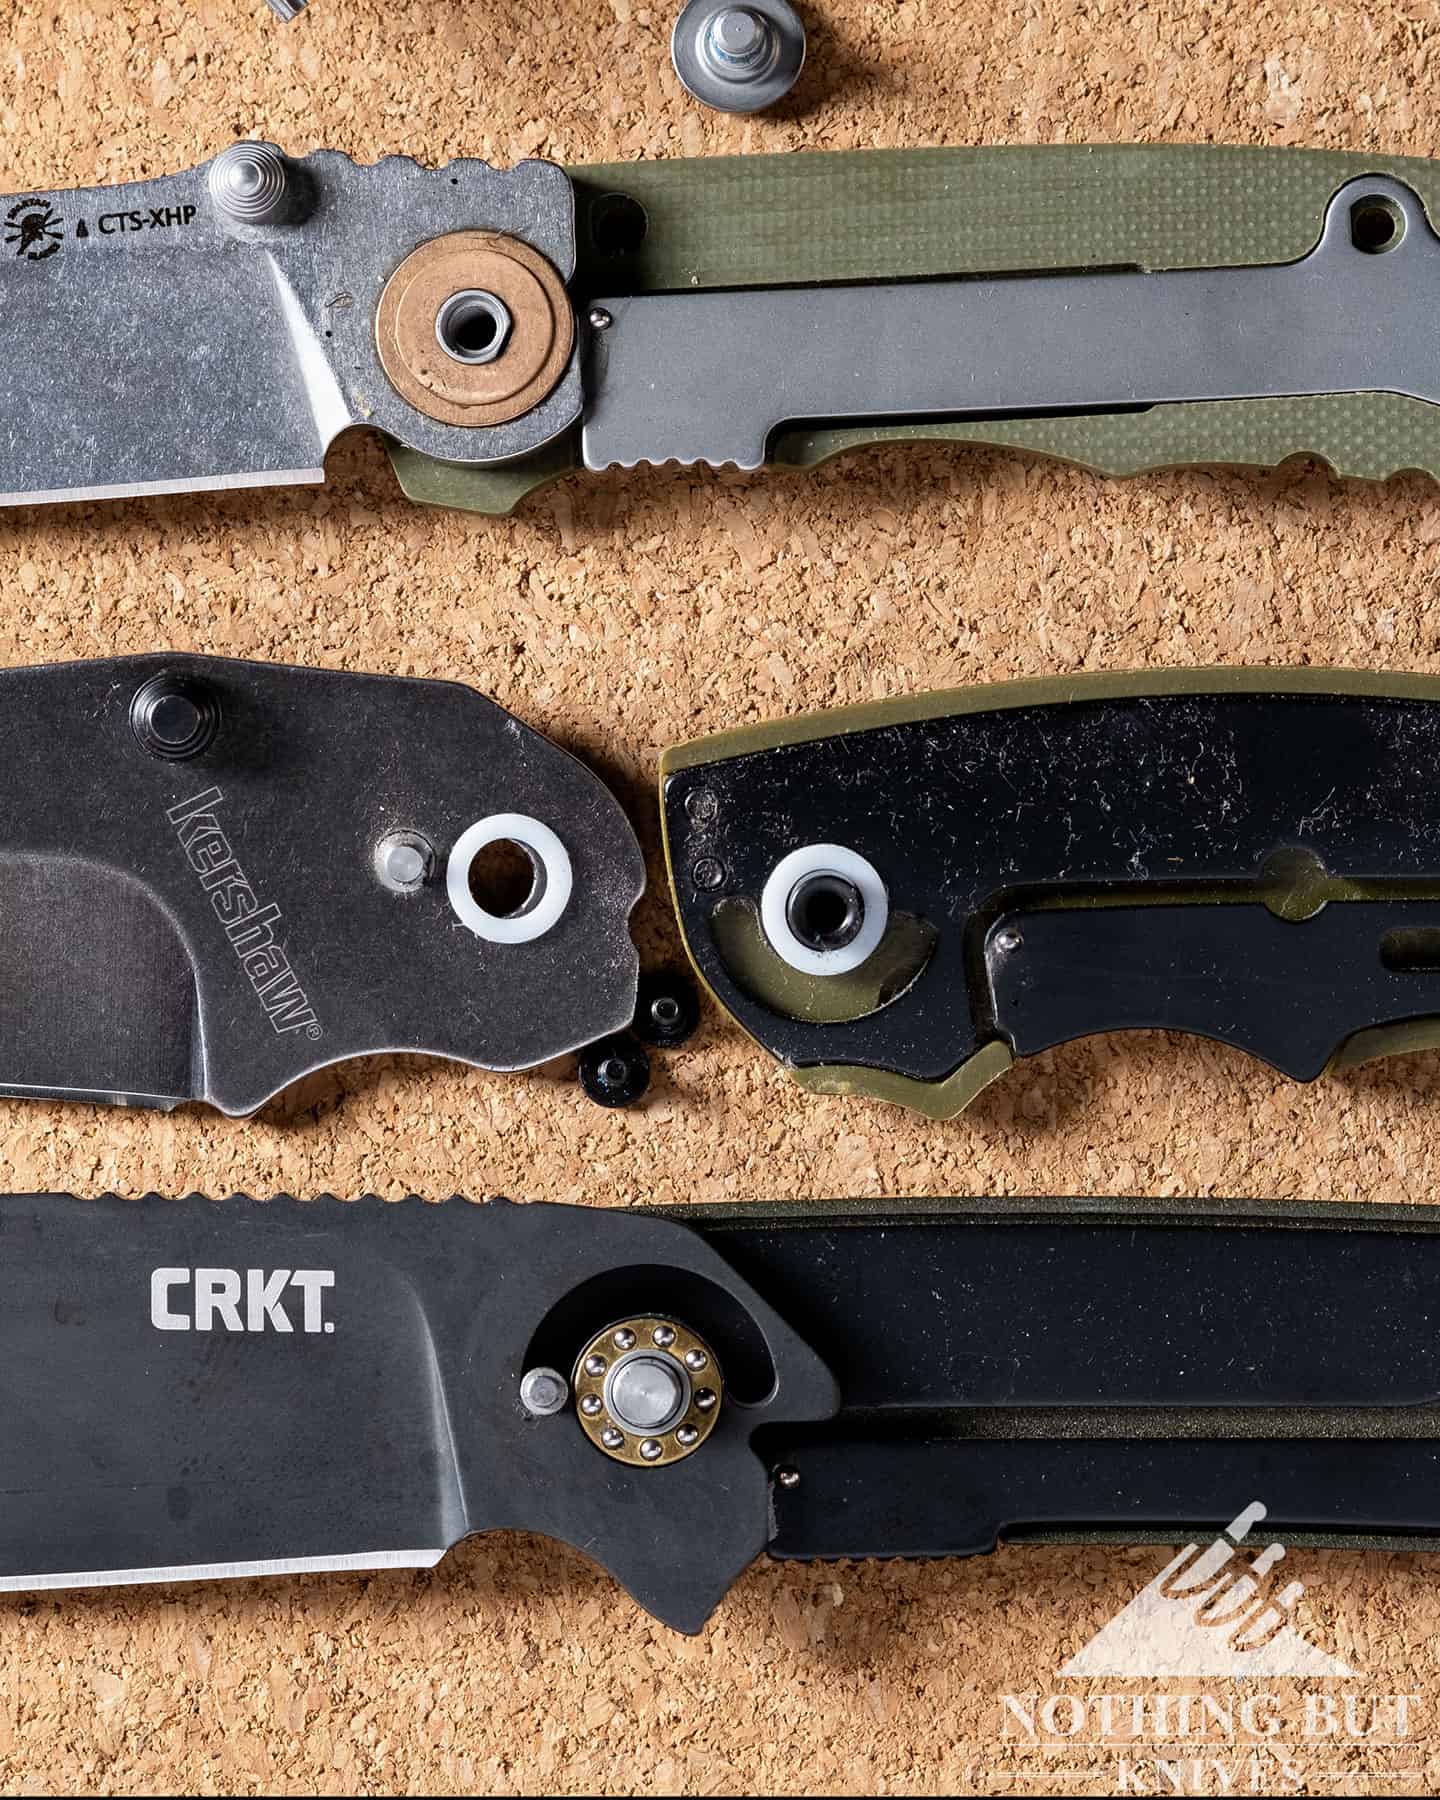 Three different disassembled pocket knives with three different pivot types.